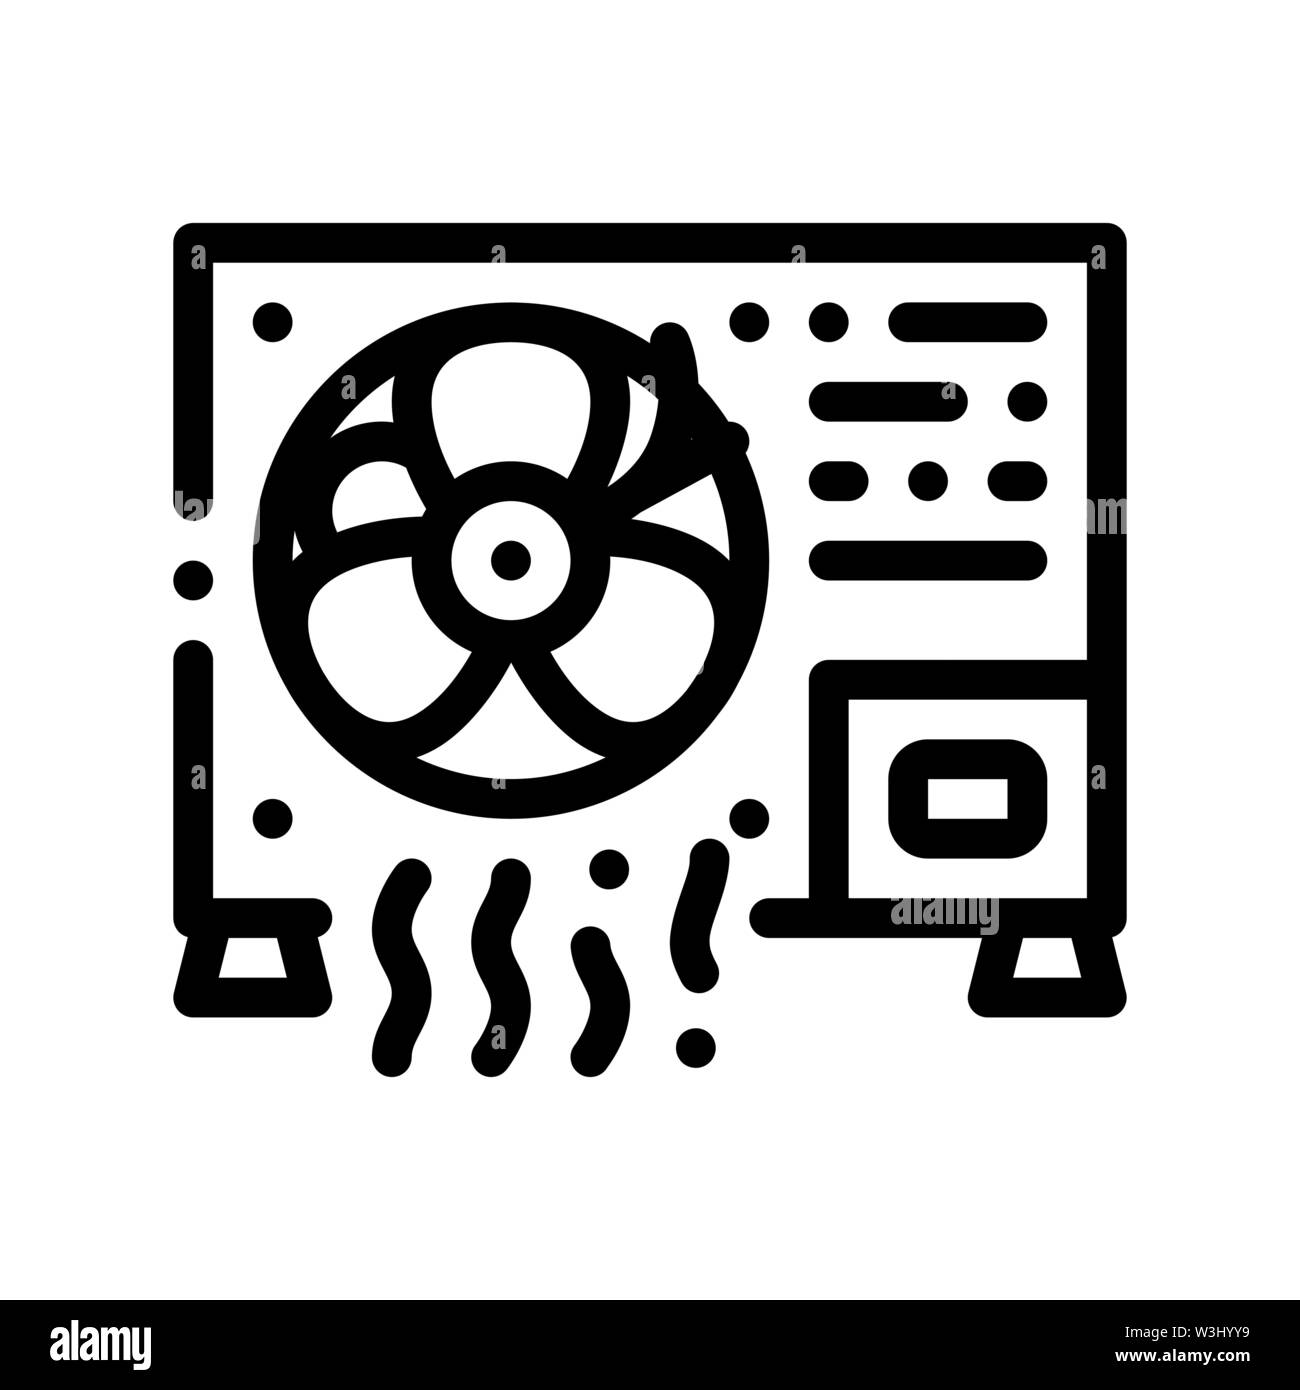 Working Conditioner System Vector Thin Line Icon Stock Vector